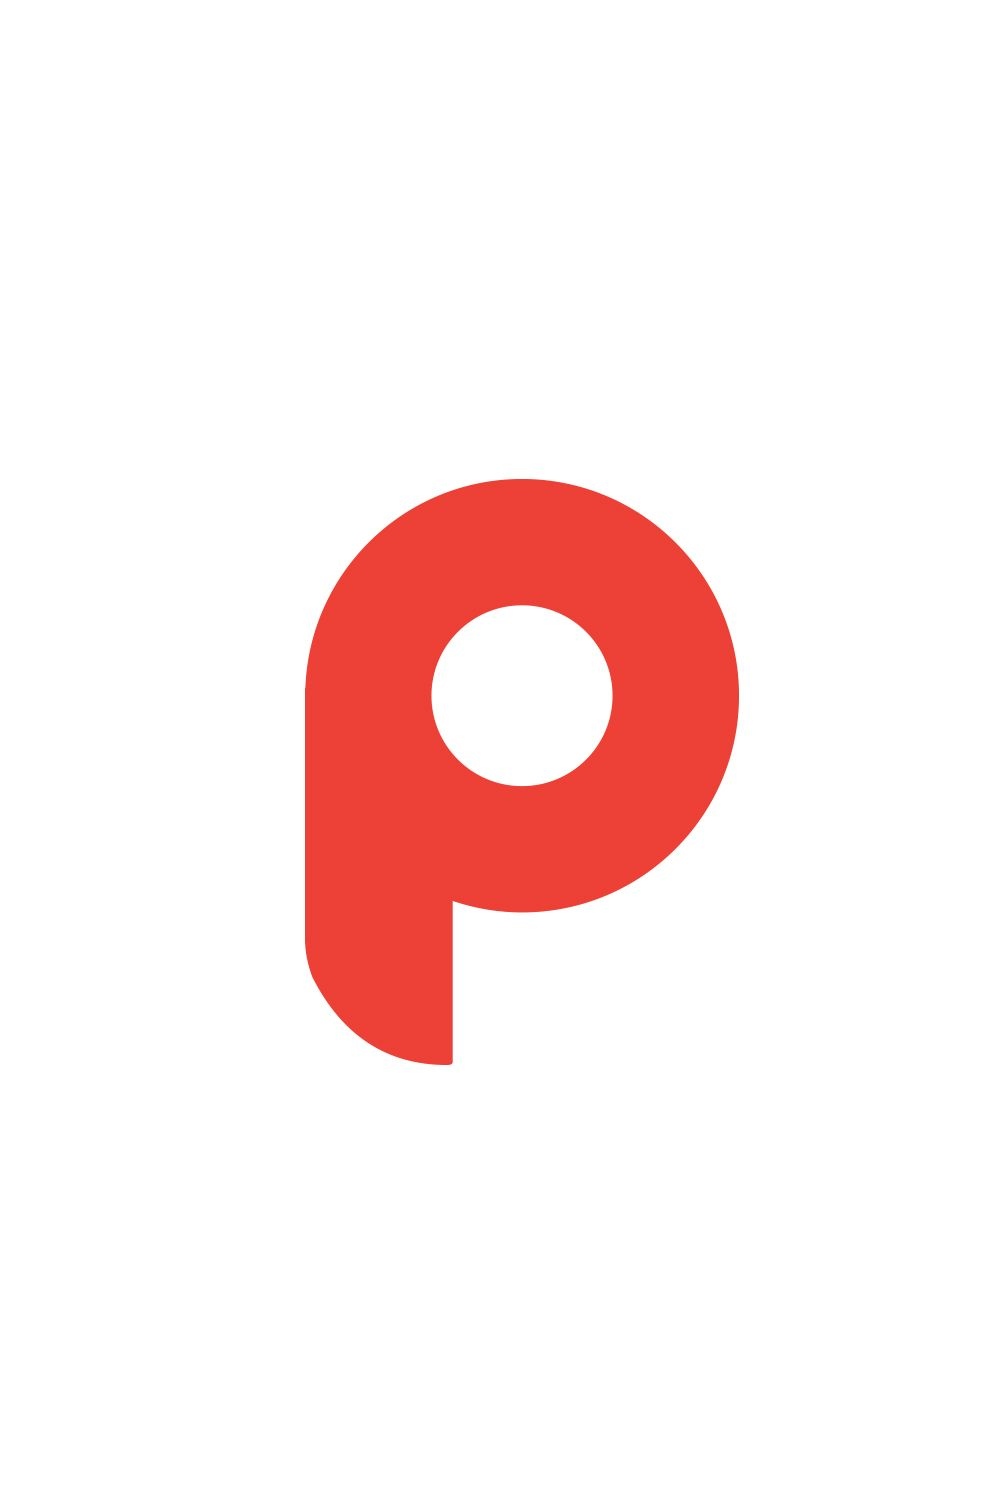 P Letter Design In Red